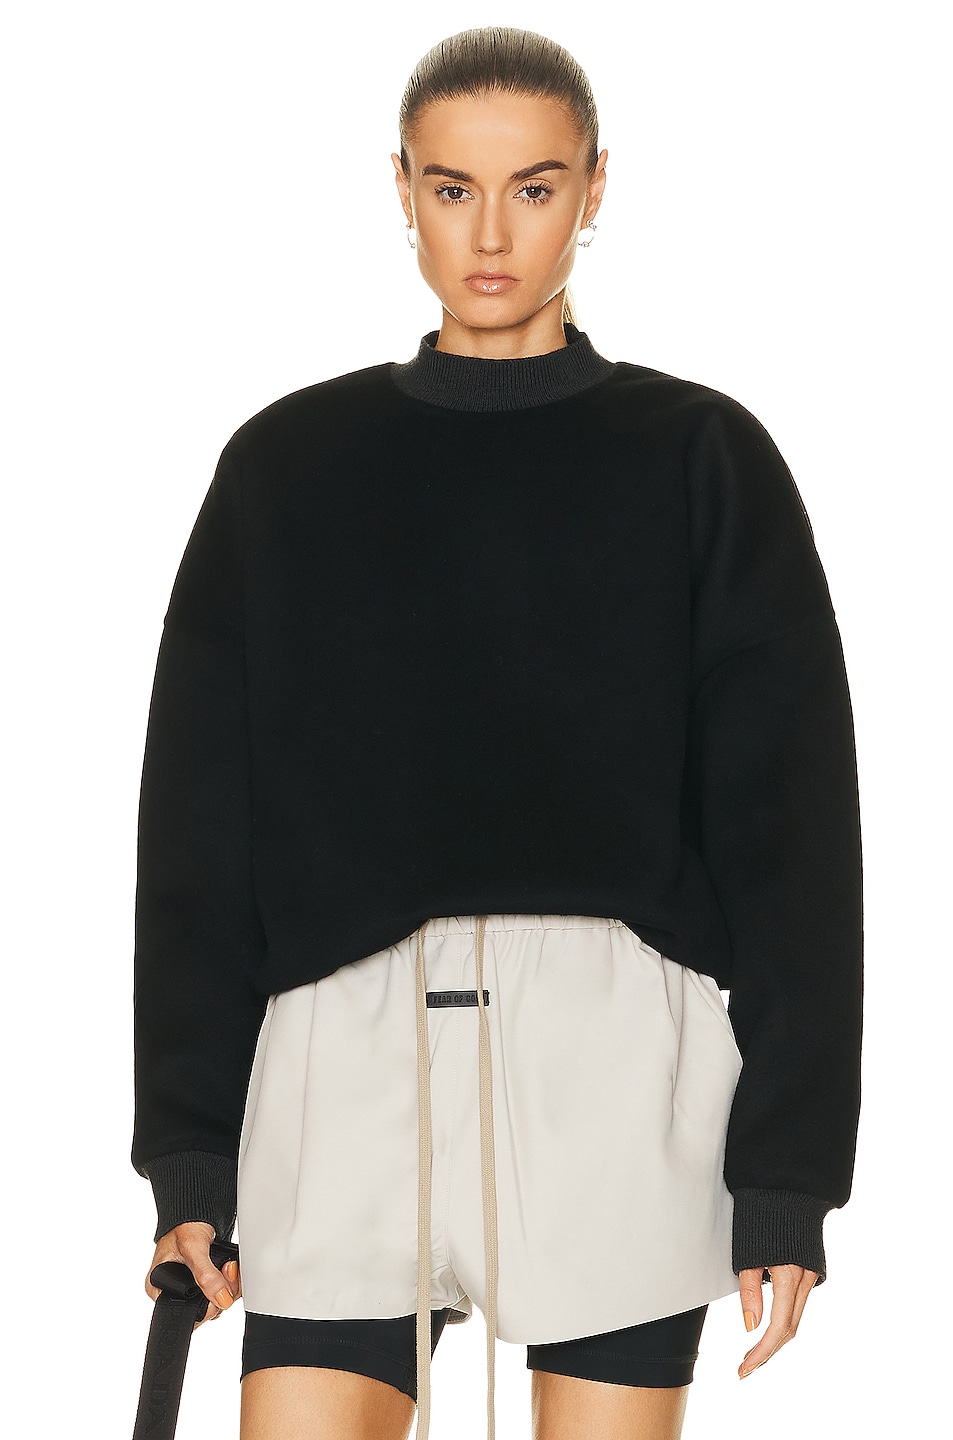 Image 1 of Fear of God Eternal Crewneck Sweater in Black